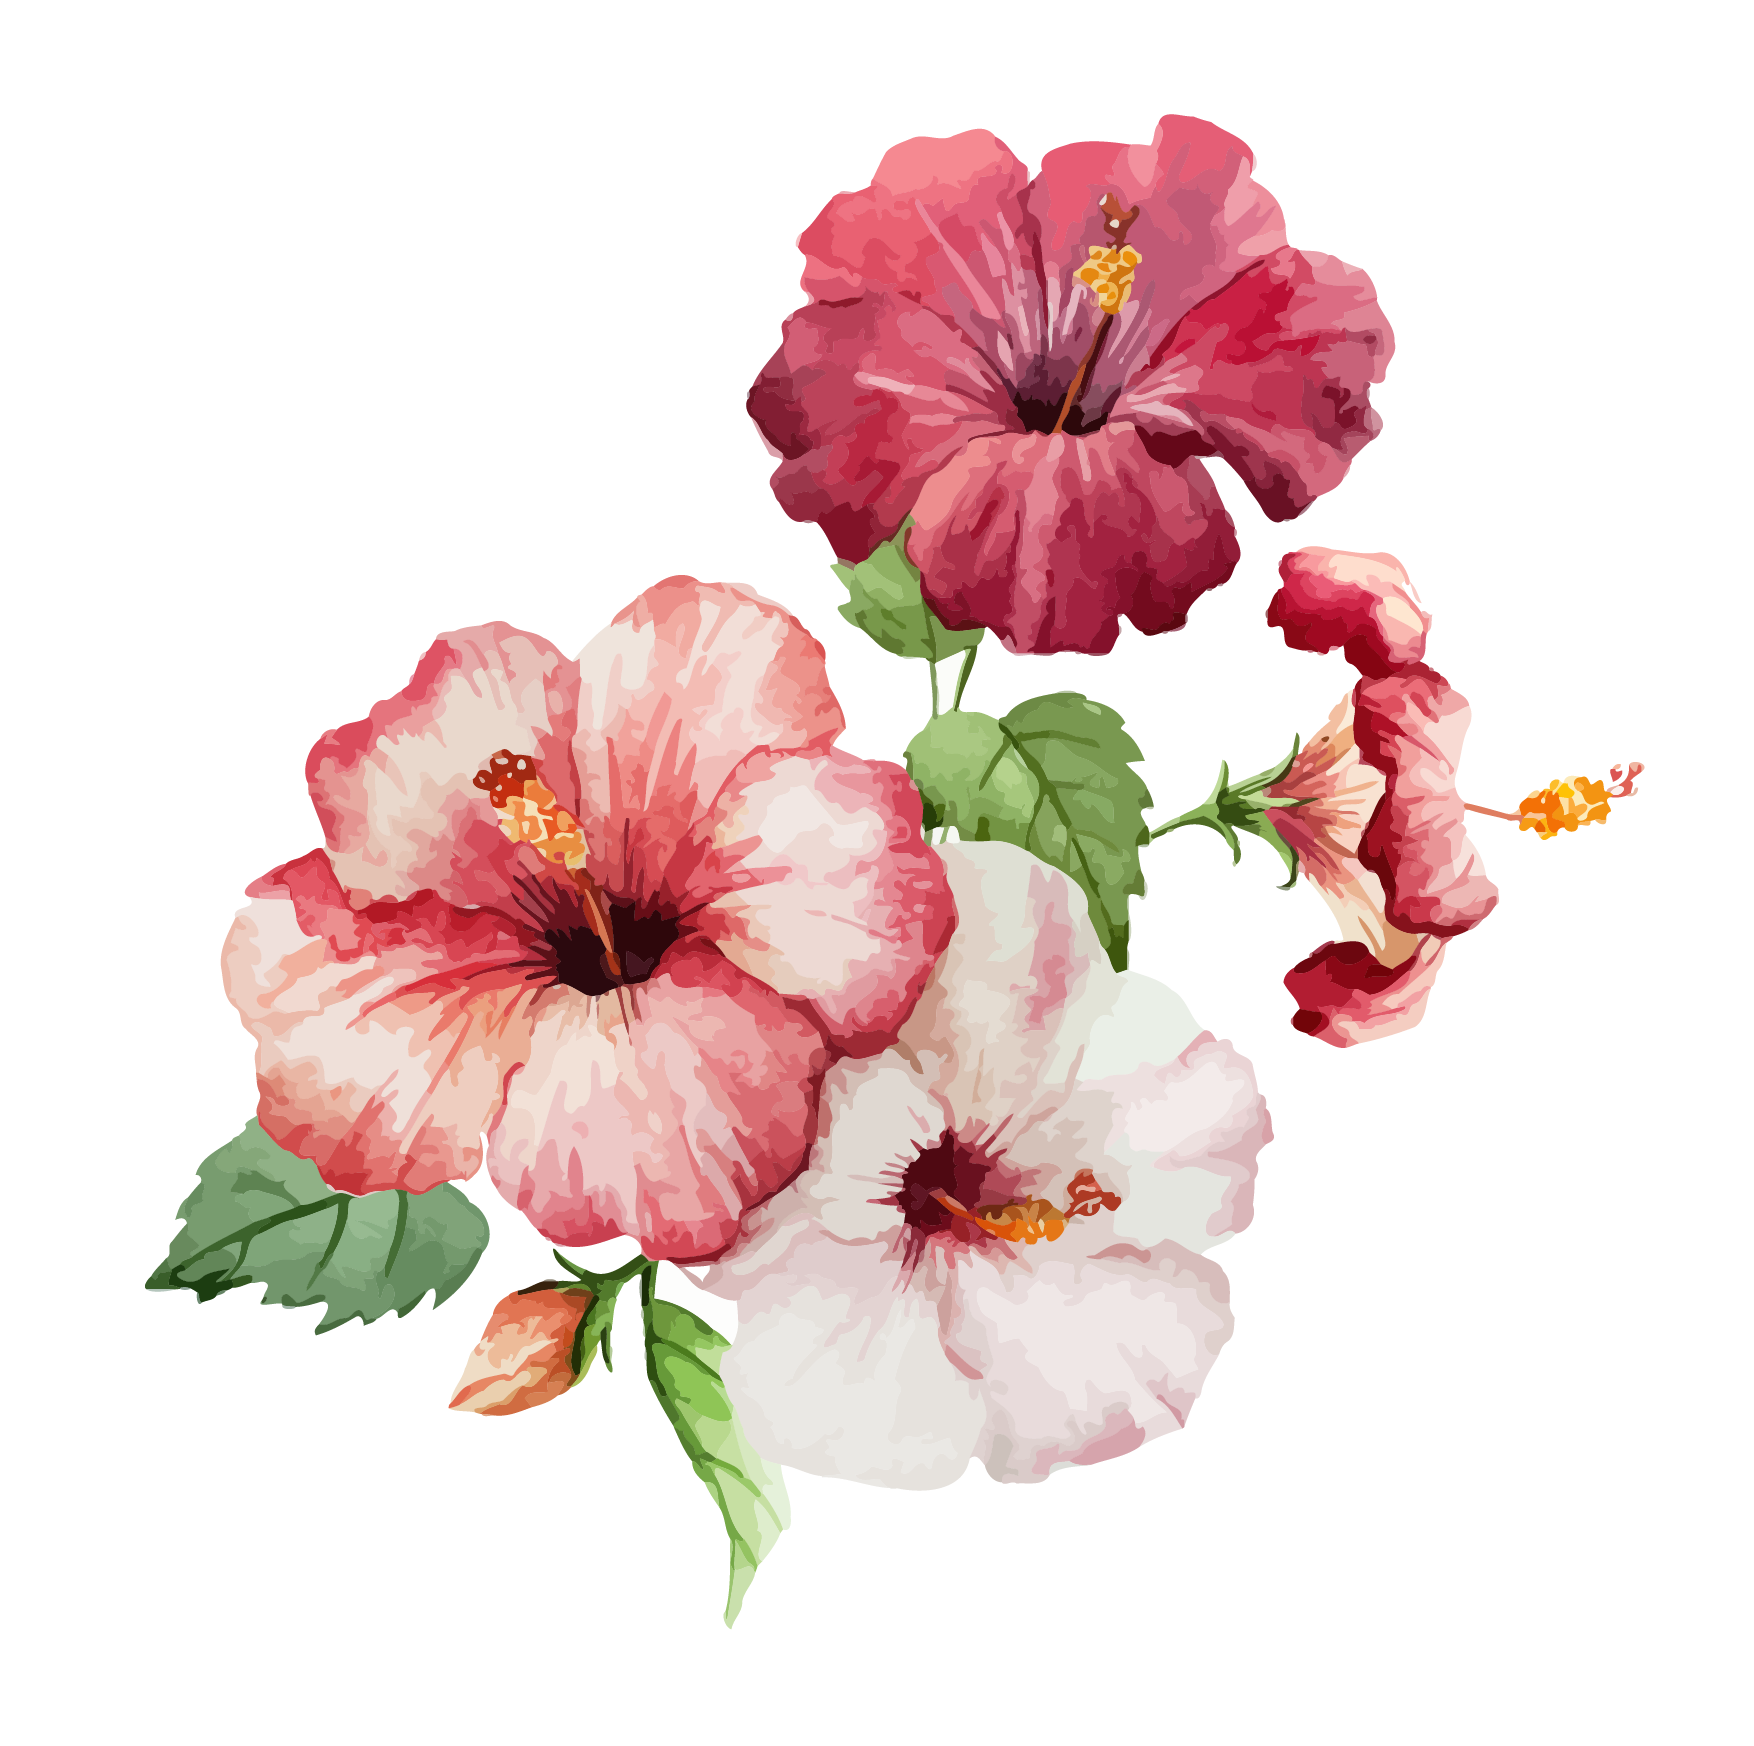 Flowers drawing at getdrawings. Hibiscus clipart colorful flower